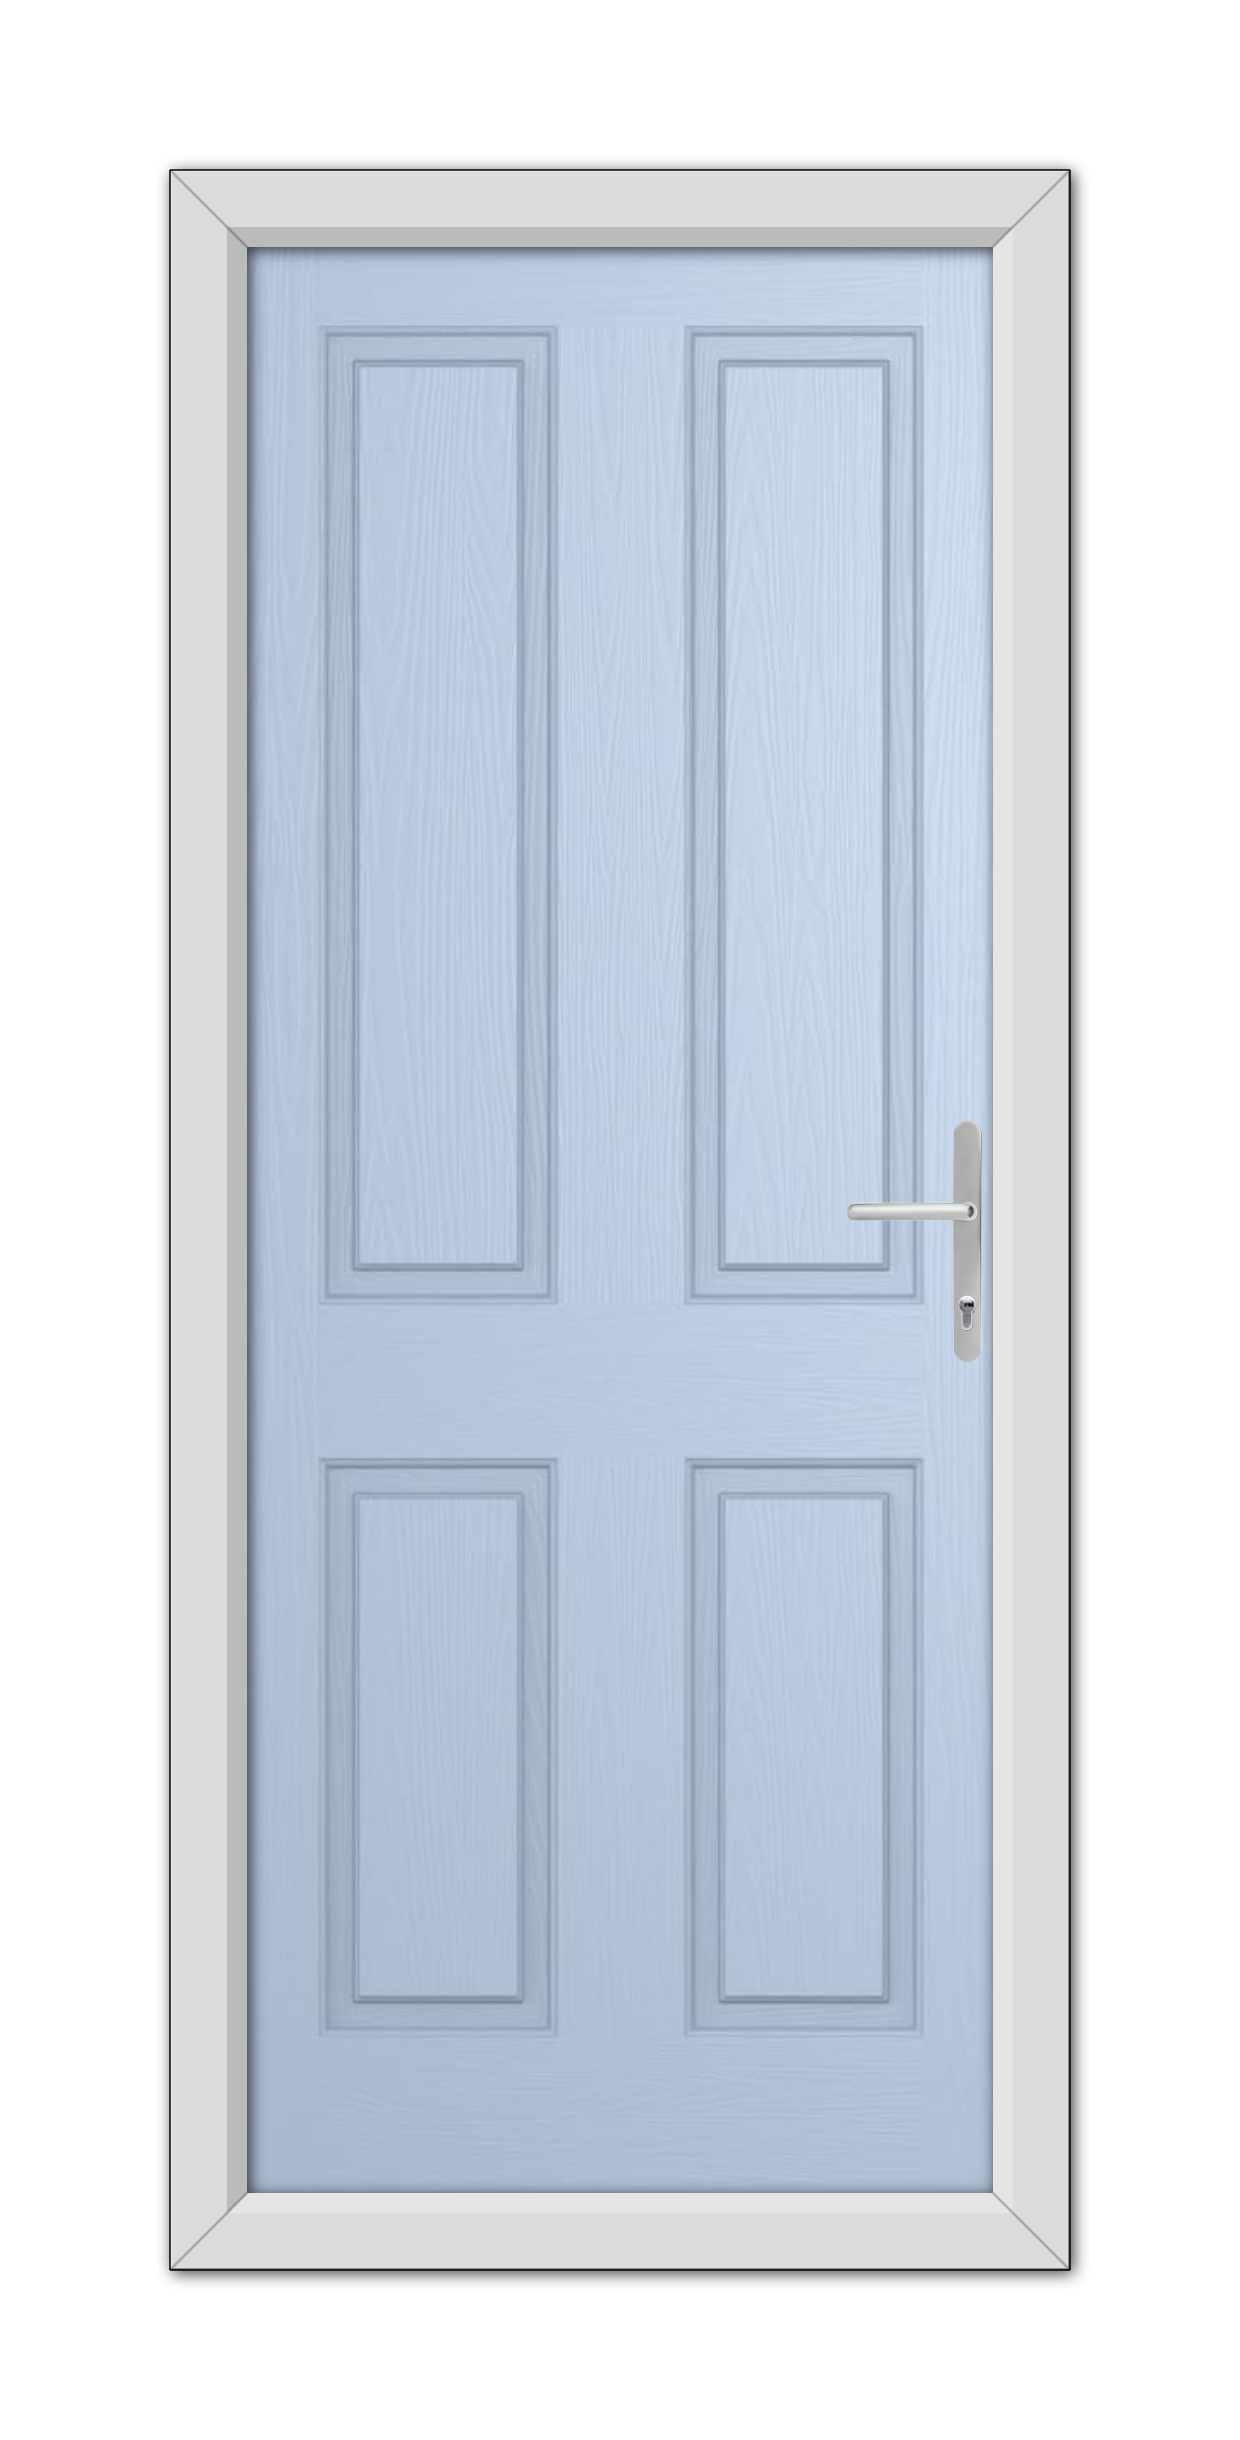 A Duck Egg Blue Whitmore Solid Composite Door with a silver handle, set within a white door frame, isolated on a white background.